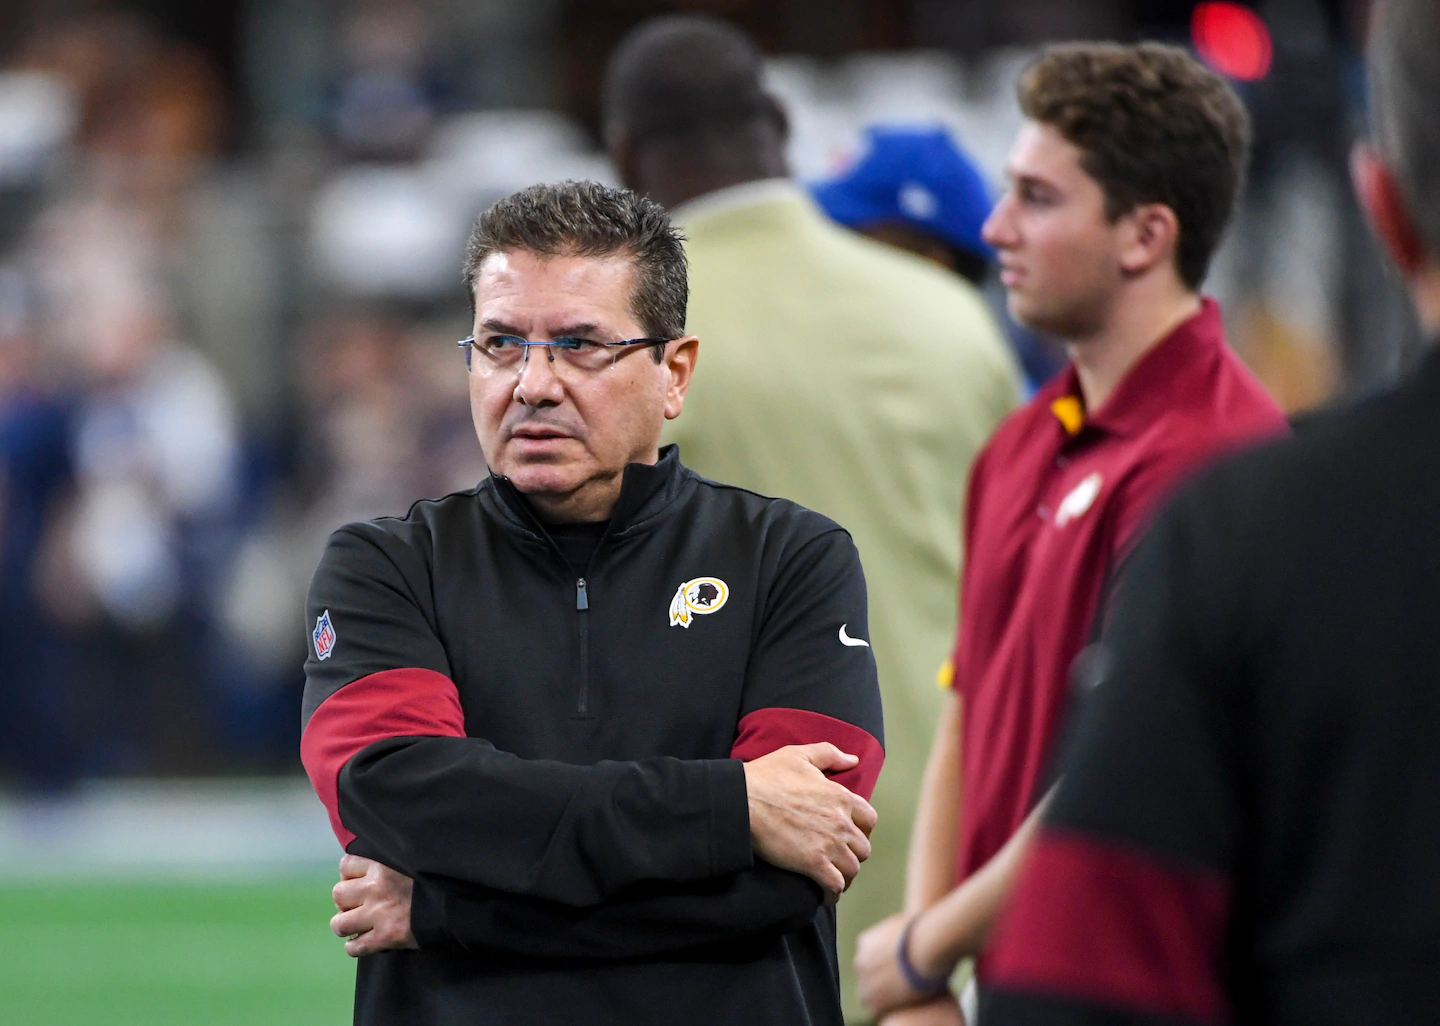 Daniel Snyder’s response to Washington Post investigation made things worse